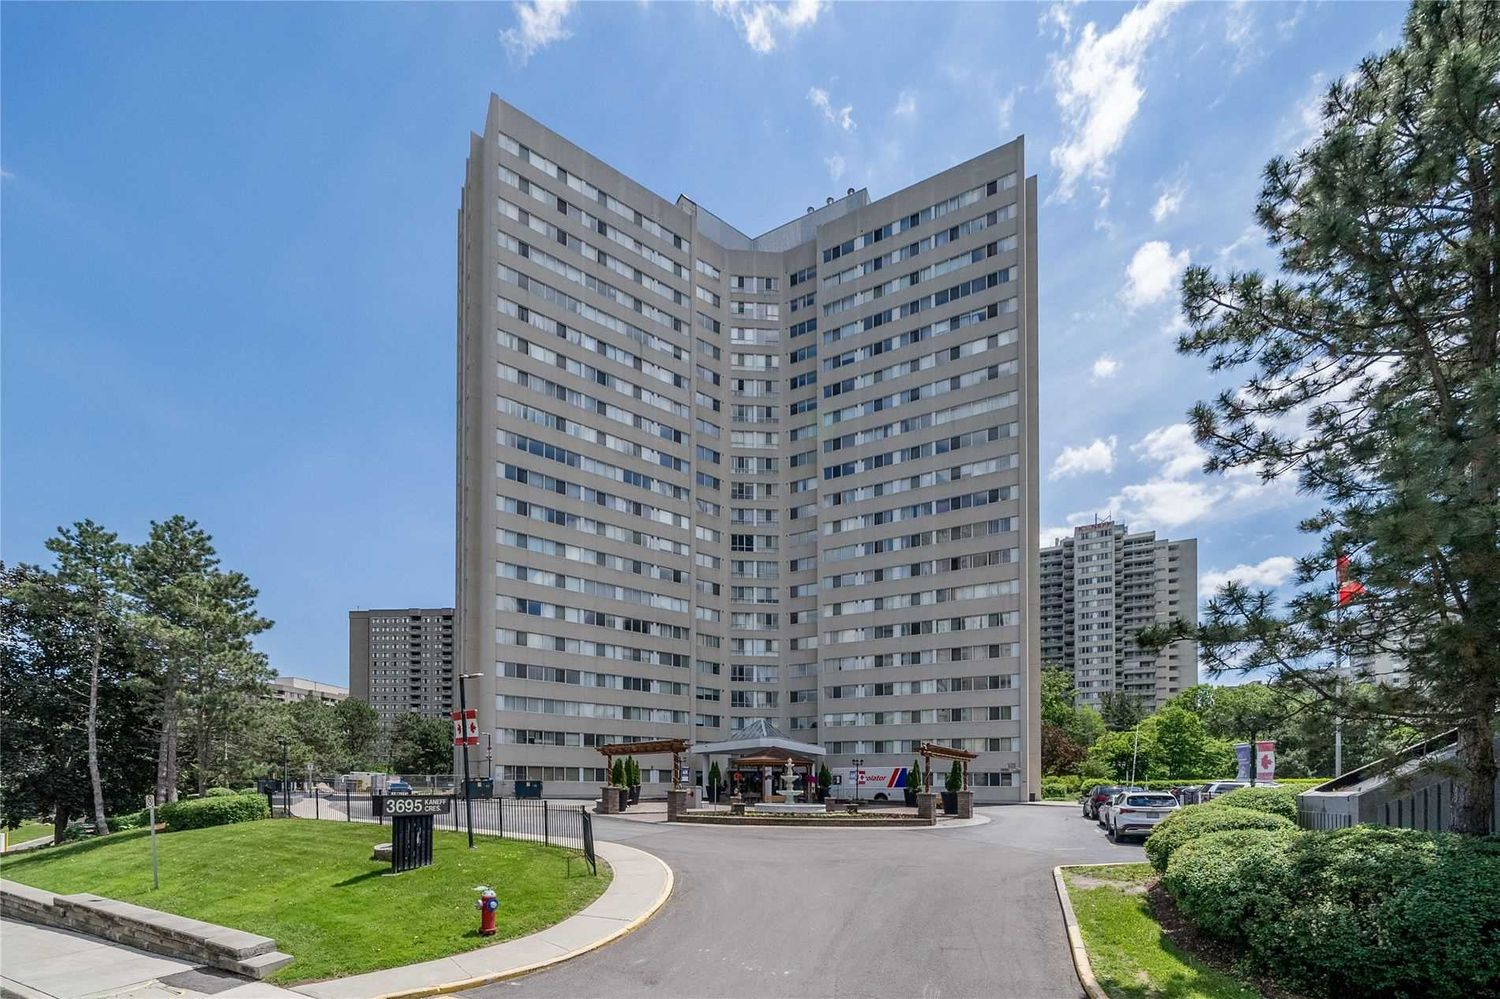 3695 Kaneff Crescent. Place Royale Condo is located in  Mississauga, Toronto - image #2 of 3